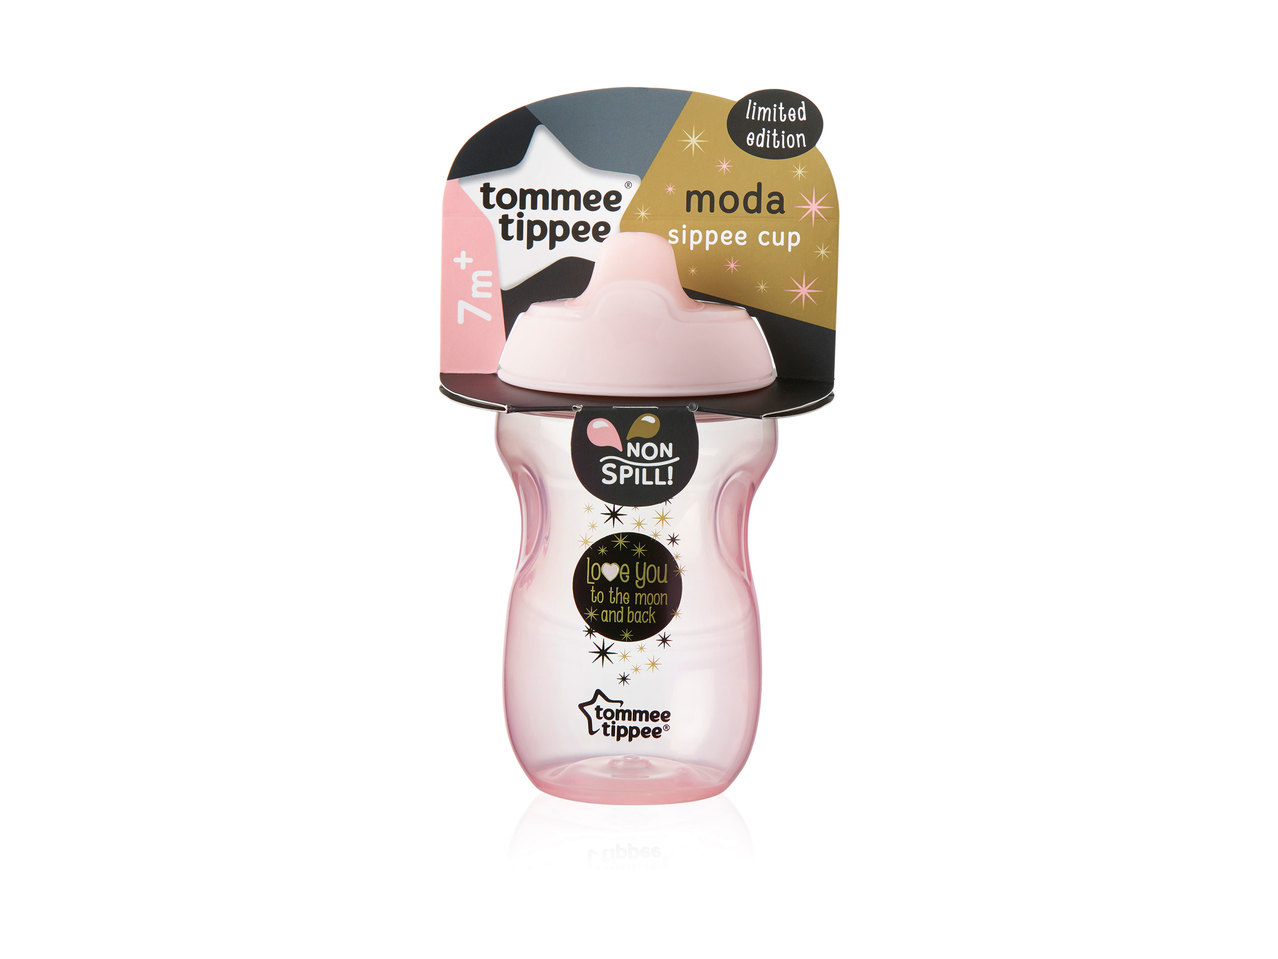 Tommee Tippee Moda Sippee Cup1